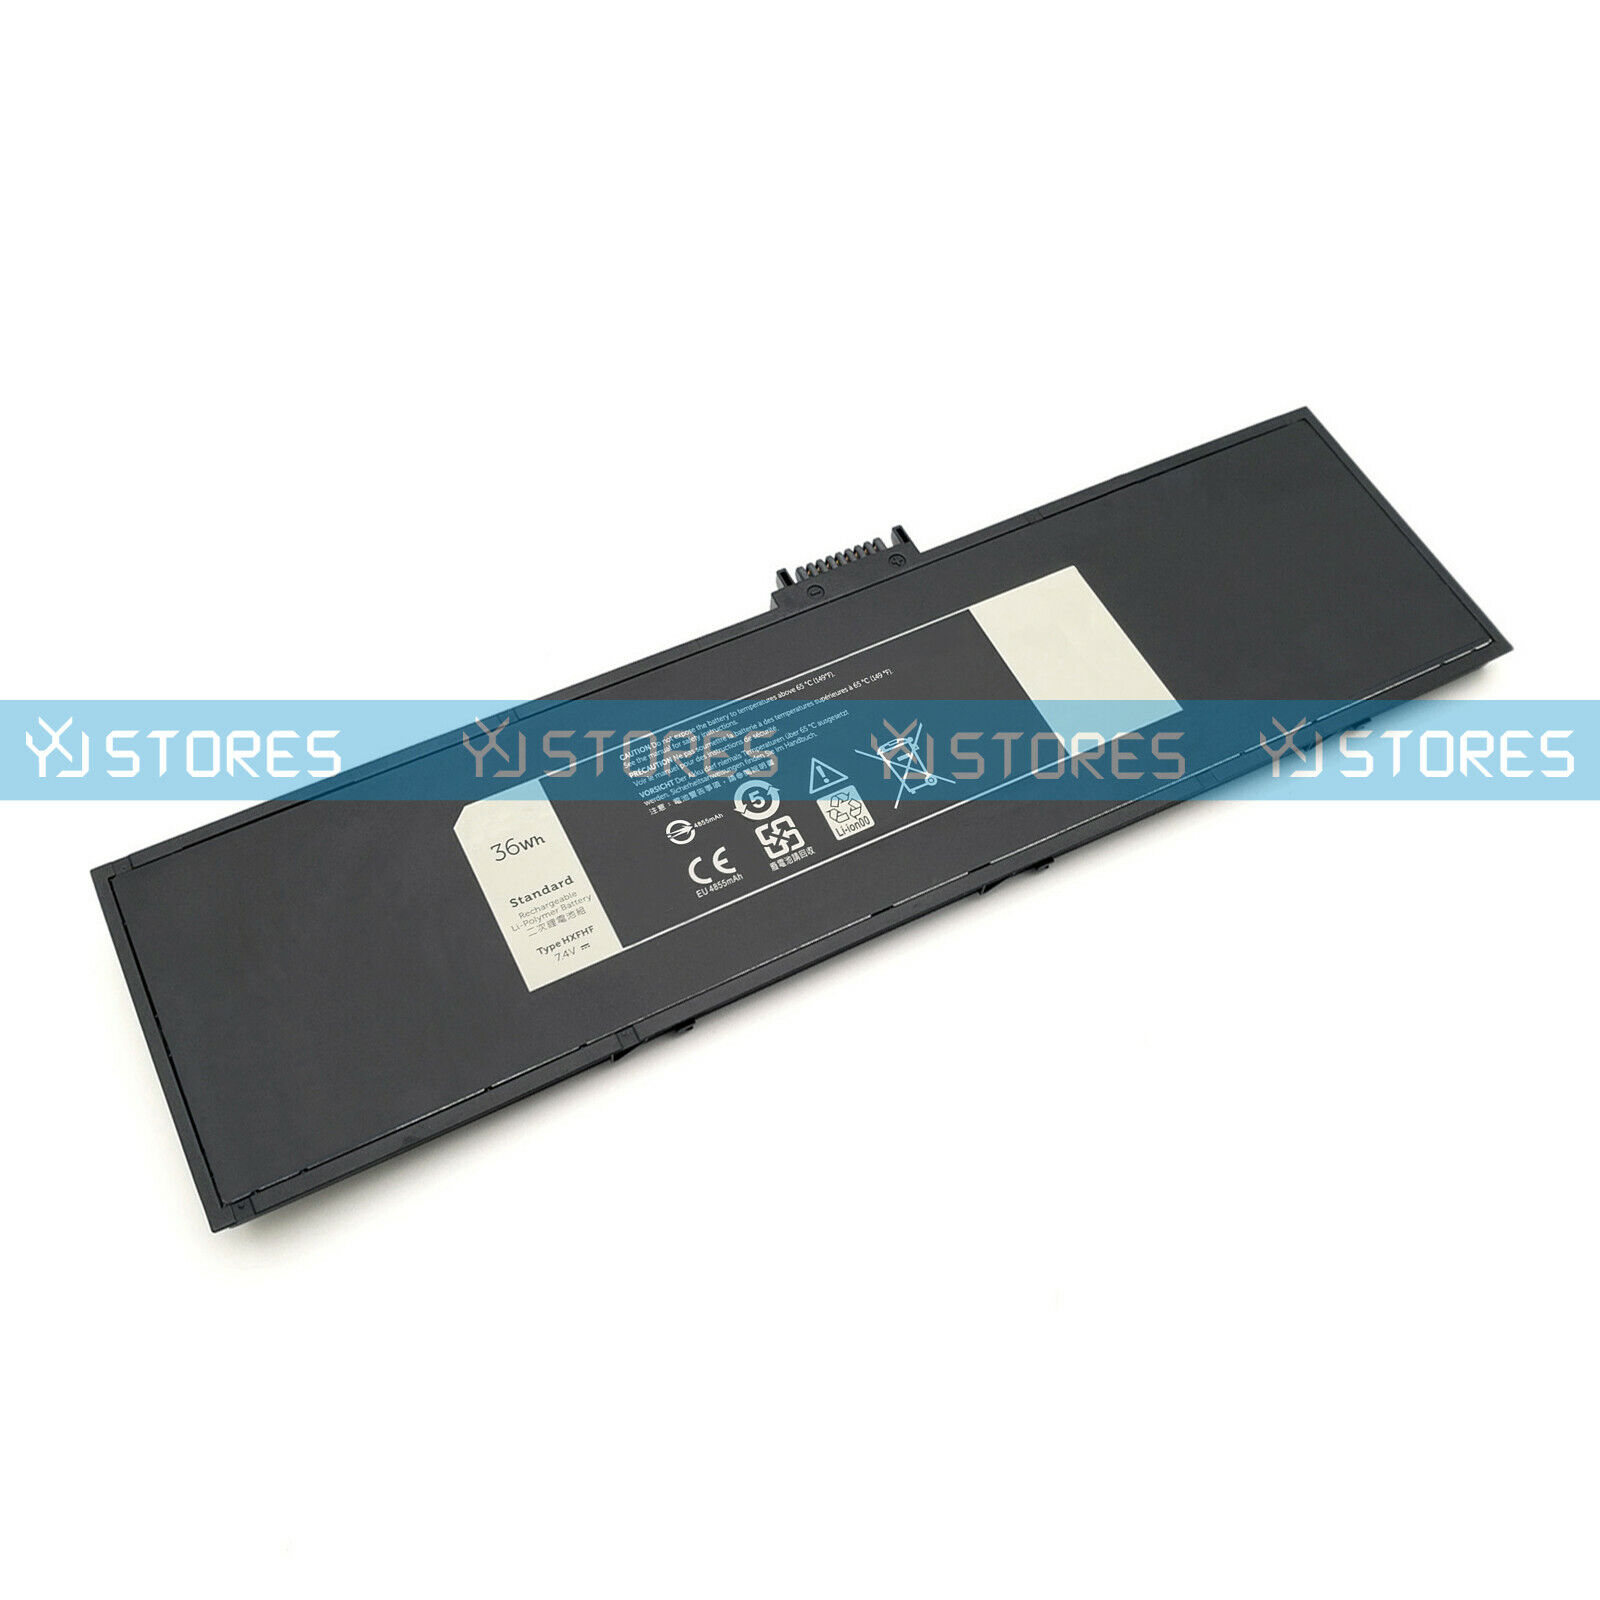 New HXFHF 36Wh Tablet Battery for Dell Venue 11 Pro 7130 7139 VT26R VJF0X XNY66